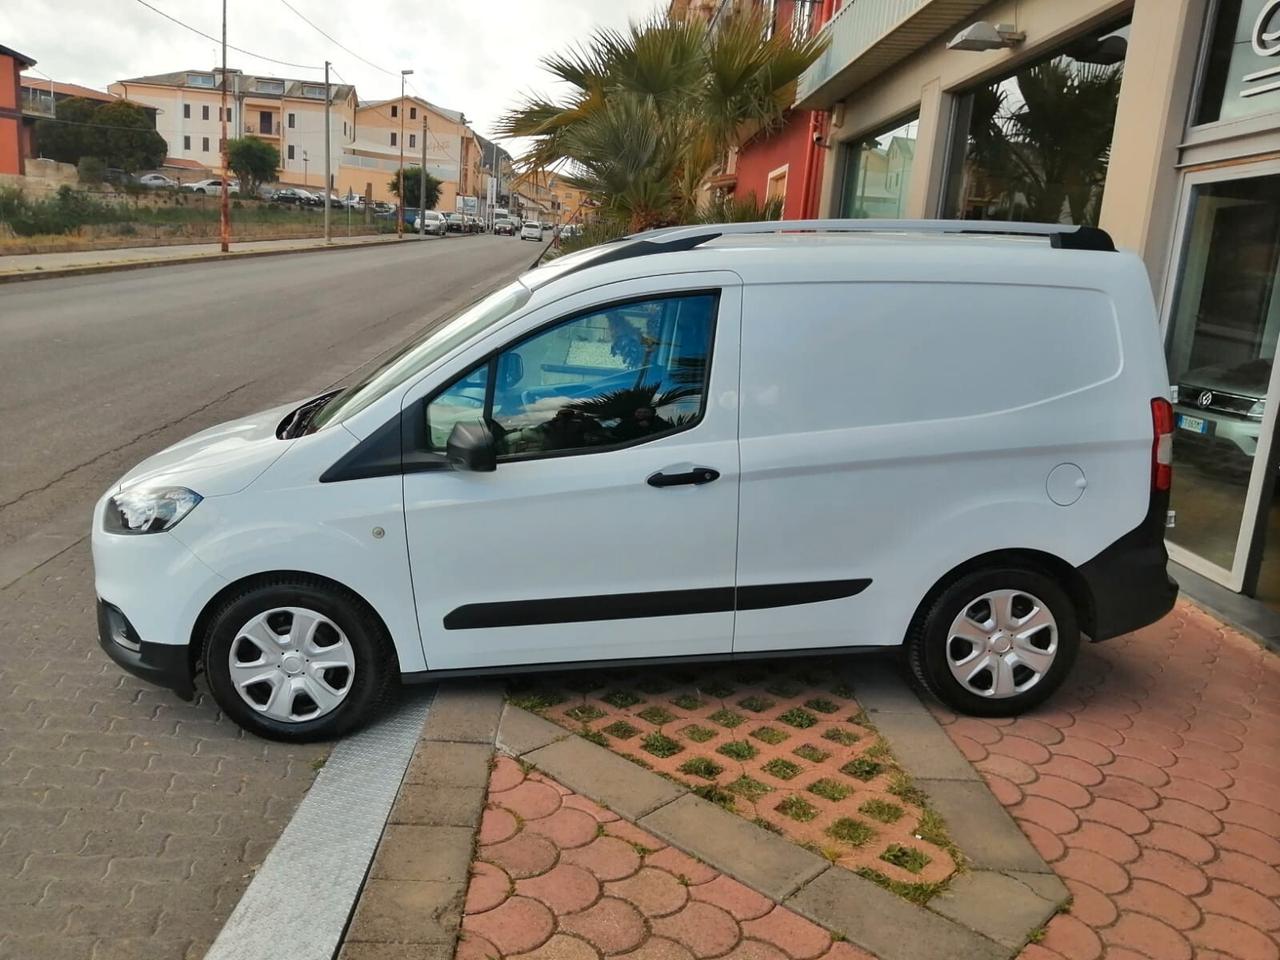 Ford Transit Courier 1.5 TDCI 100 CV S&S trend